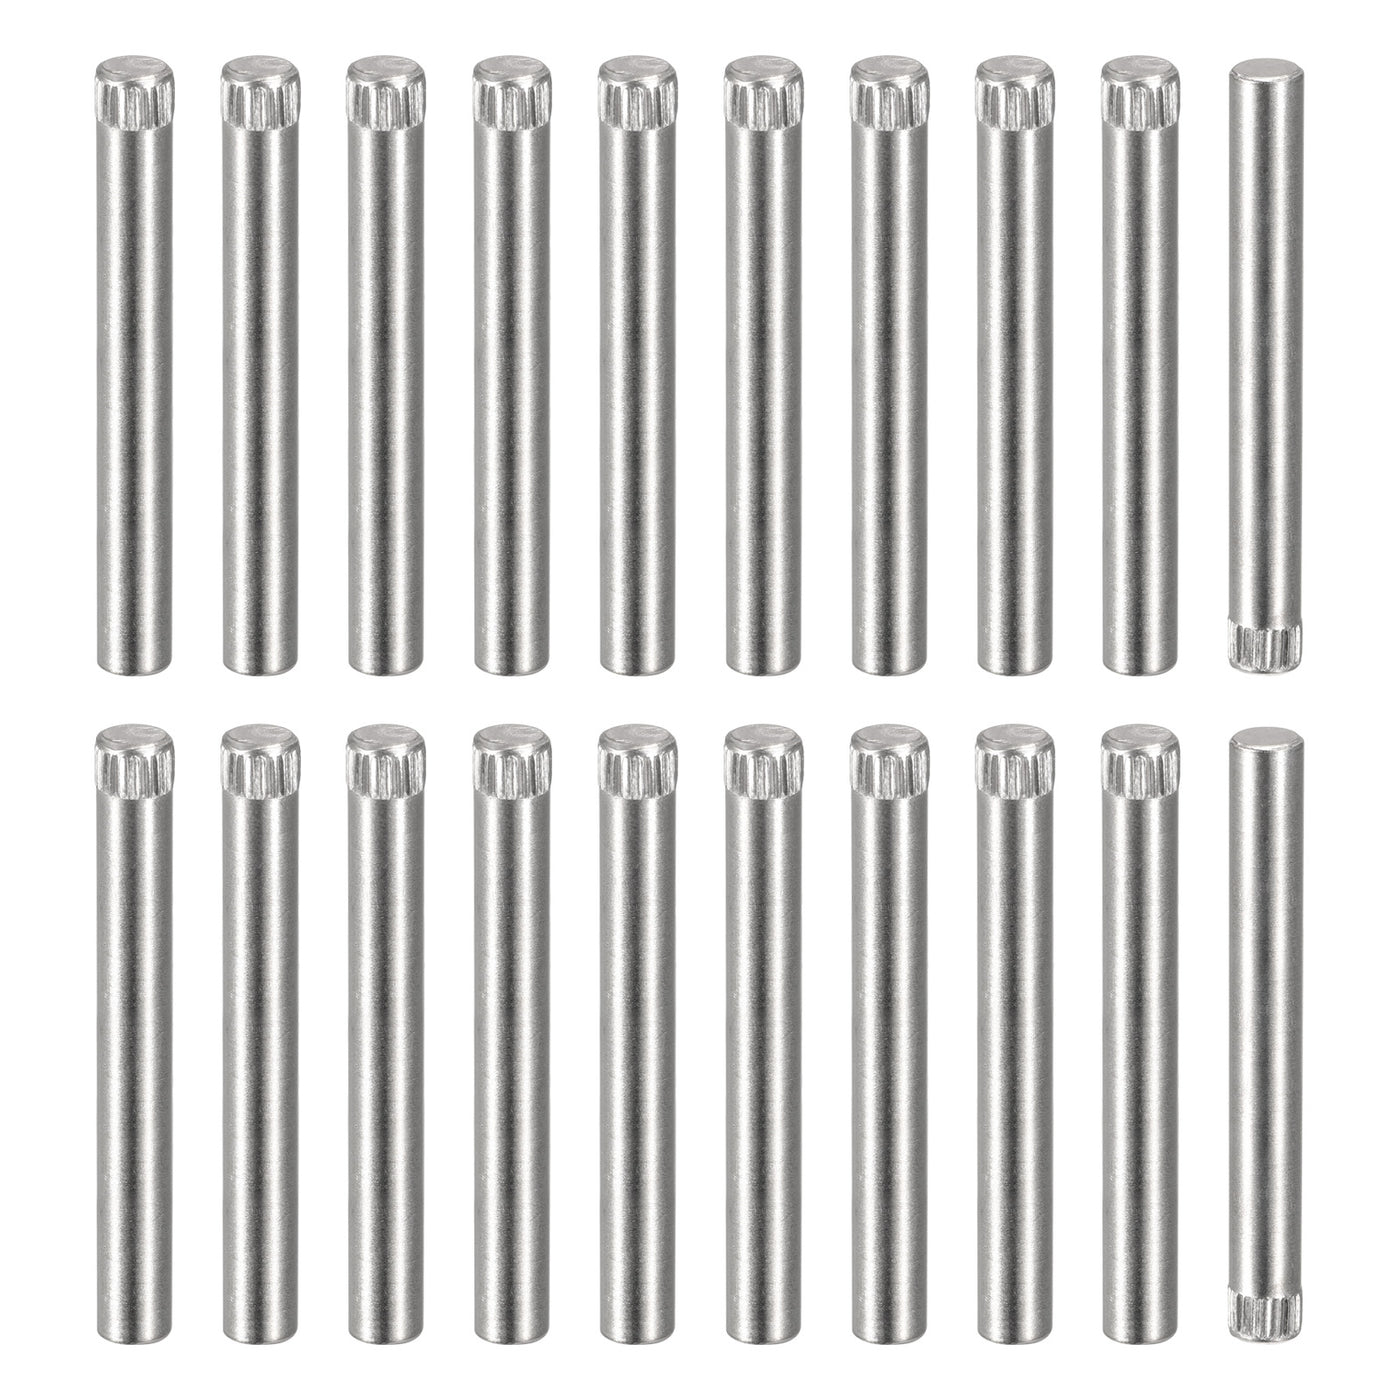 uxcell Uxcell 6x50mm 304 Stainless Steel Dowel Pins, 20Pcs Knurled Head Flat End Dowel Pin